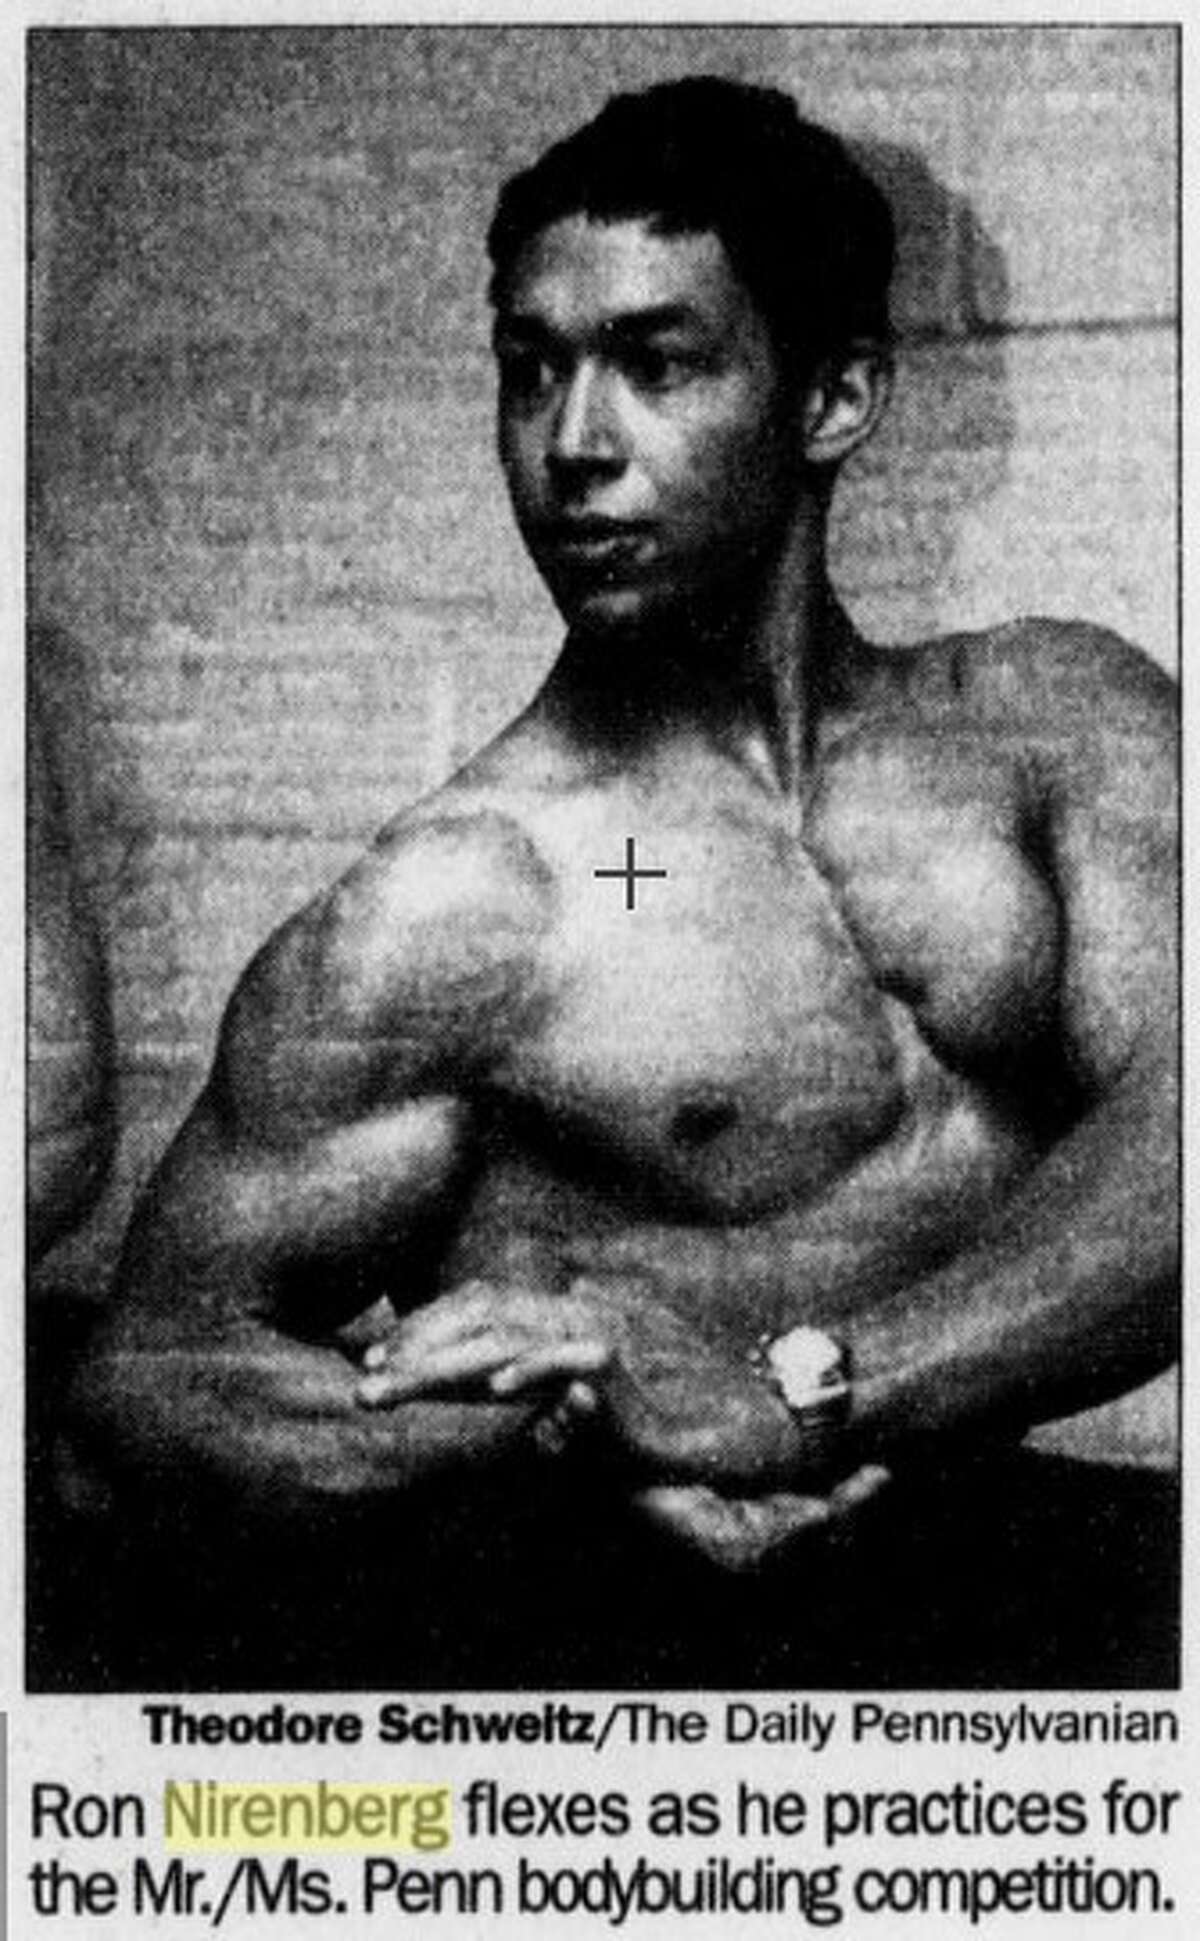 Ron Nirenberg appears in the University of Pennsylvania's newspaper The Daily Pennsylvanian in November 2000 ahead of a bodybuilding competition at the university.